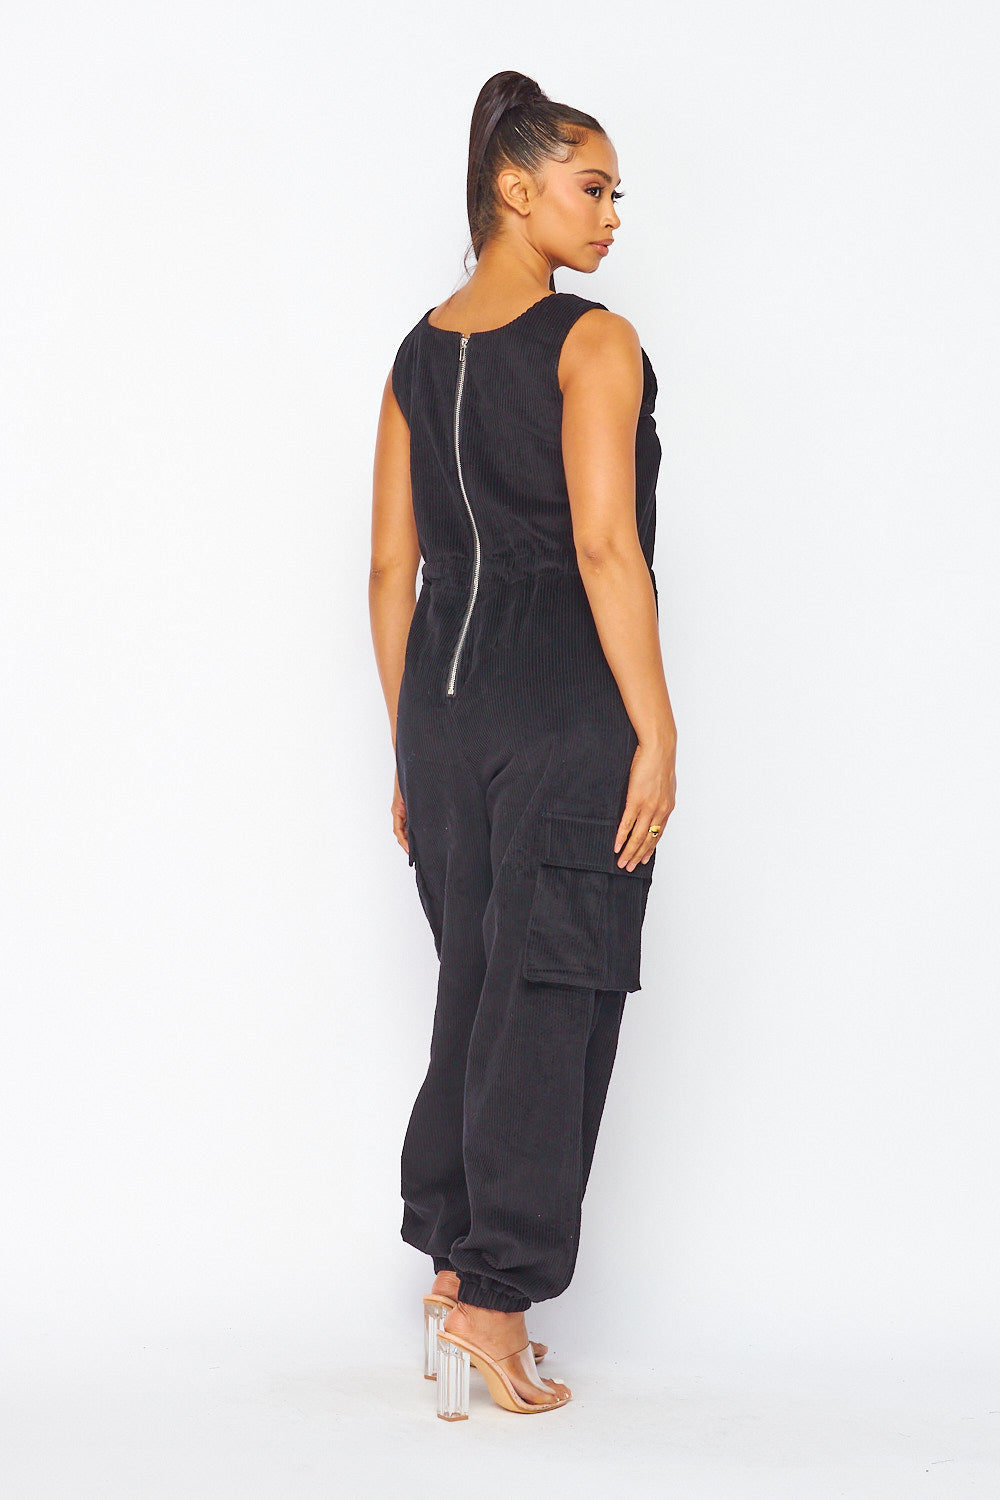 New In Town Corduroy Cargo Pocket Jogger Jumpsuit